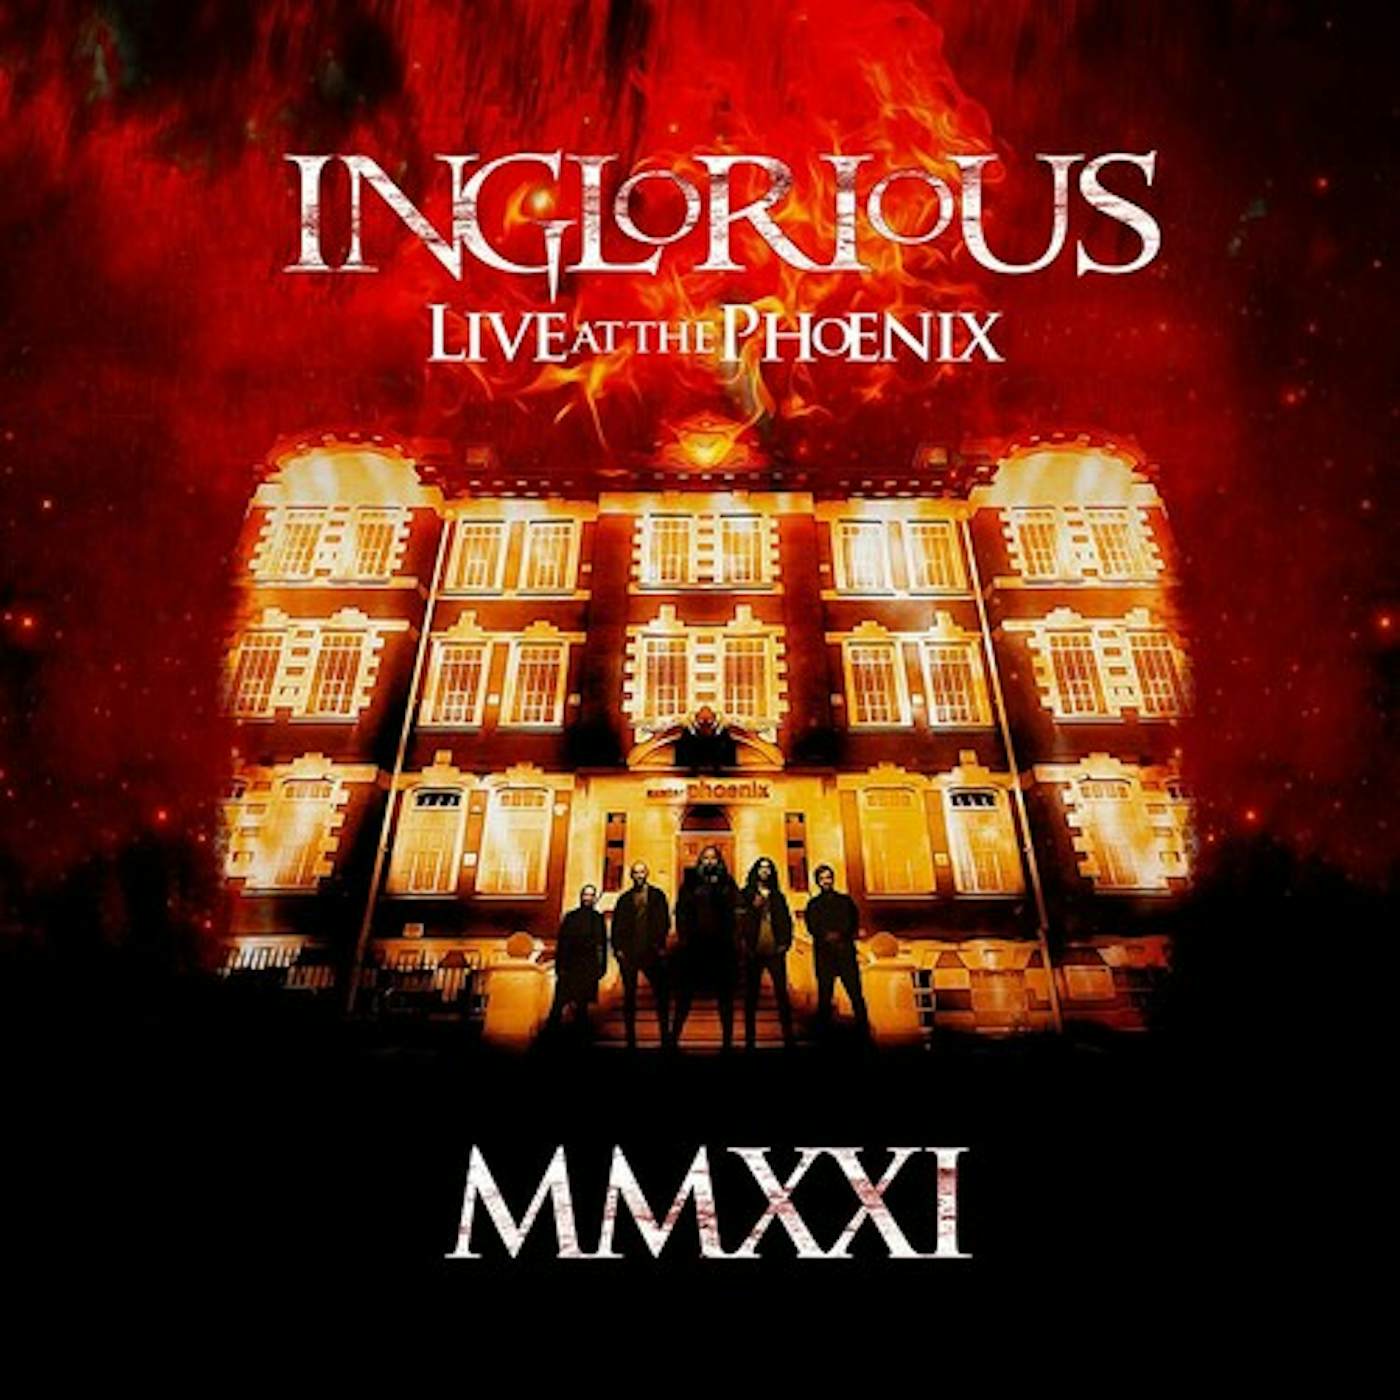 Inglorious MMXXI LIVE AT THE PHOENIX Blu-ray